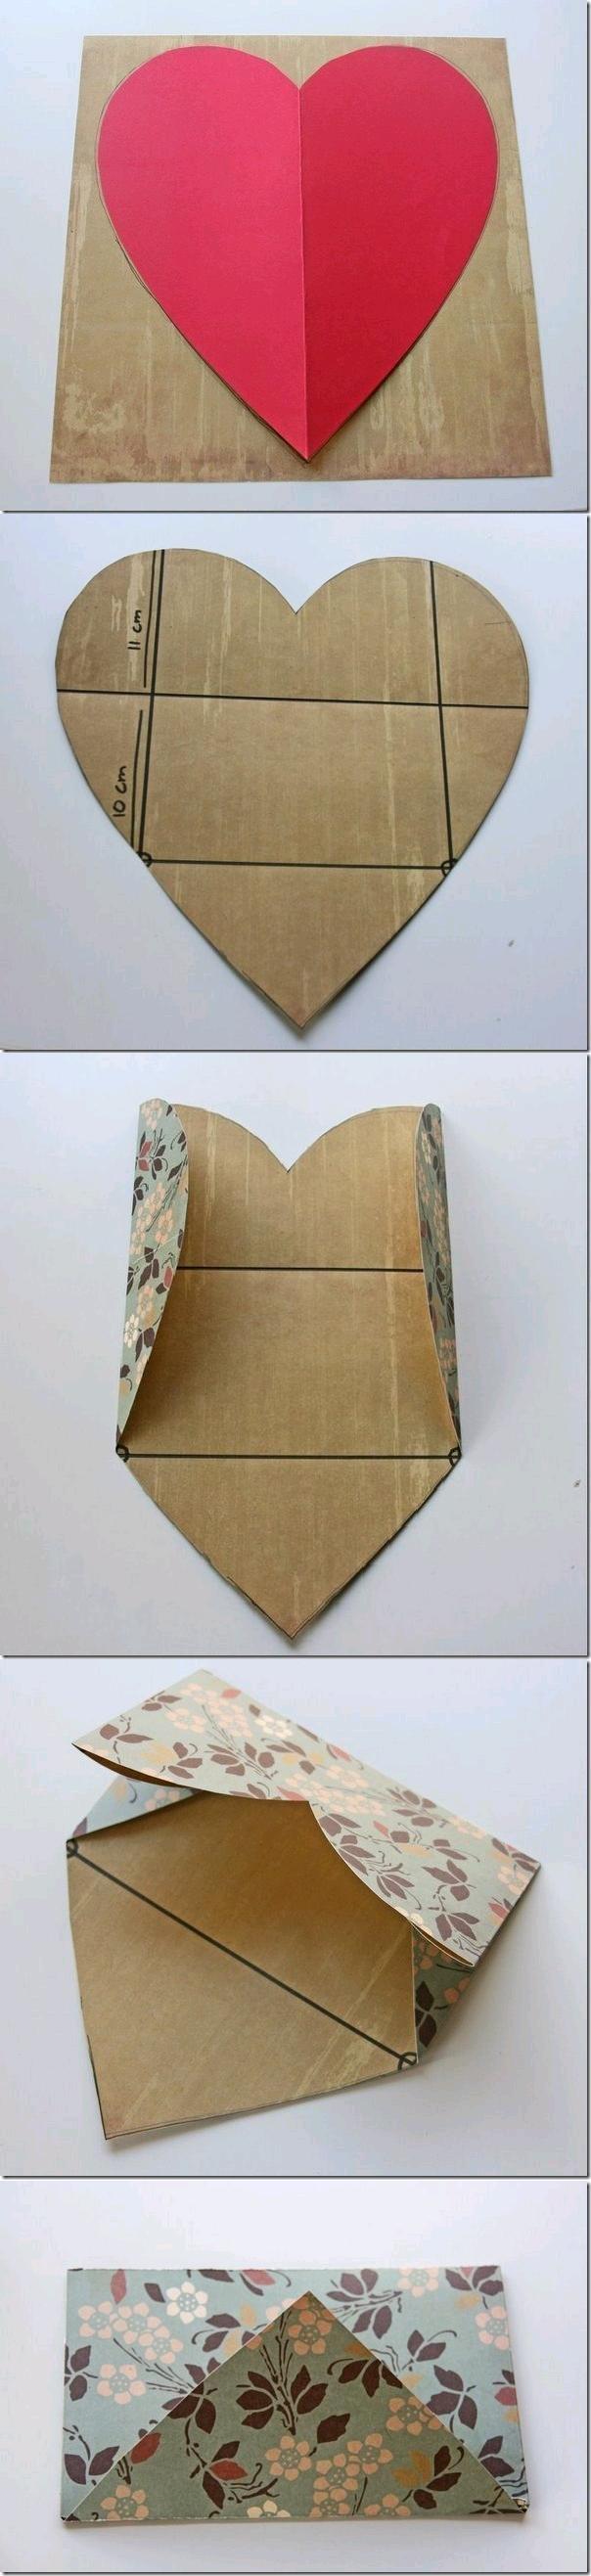 DIY Easy Envelope from Heart Shaped Paper 1